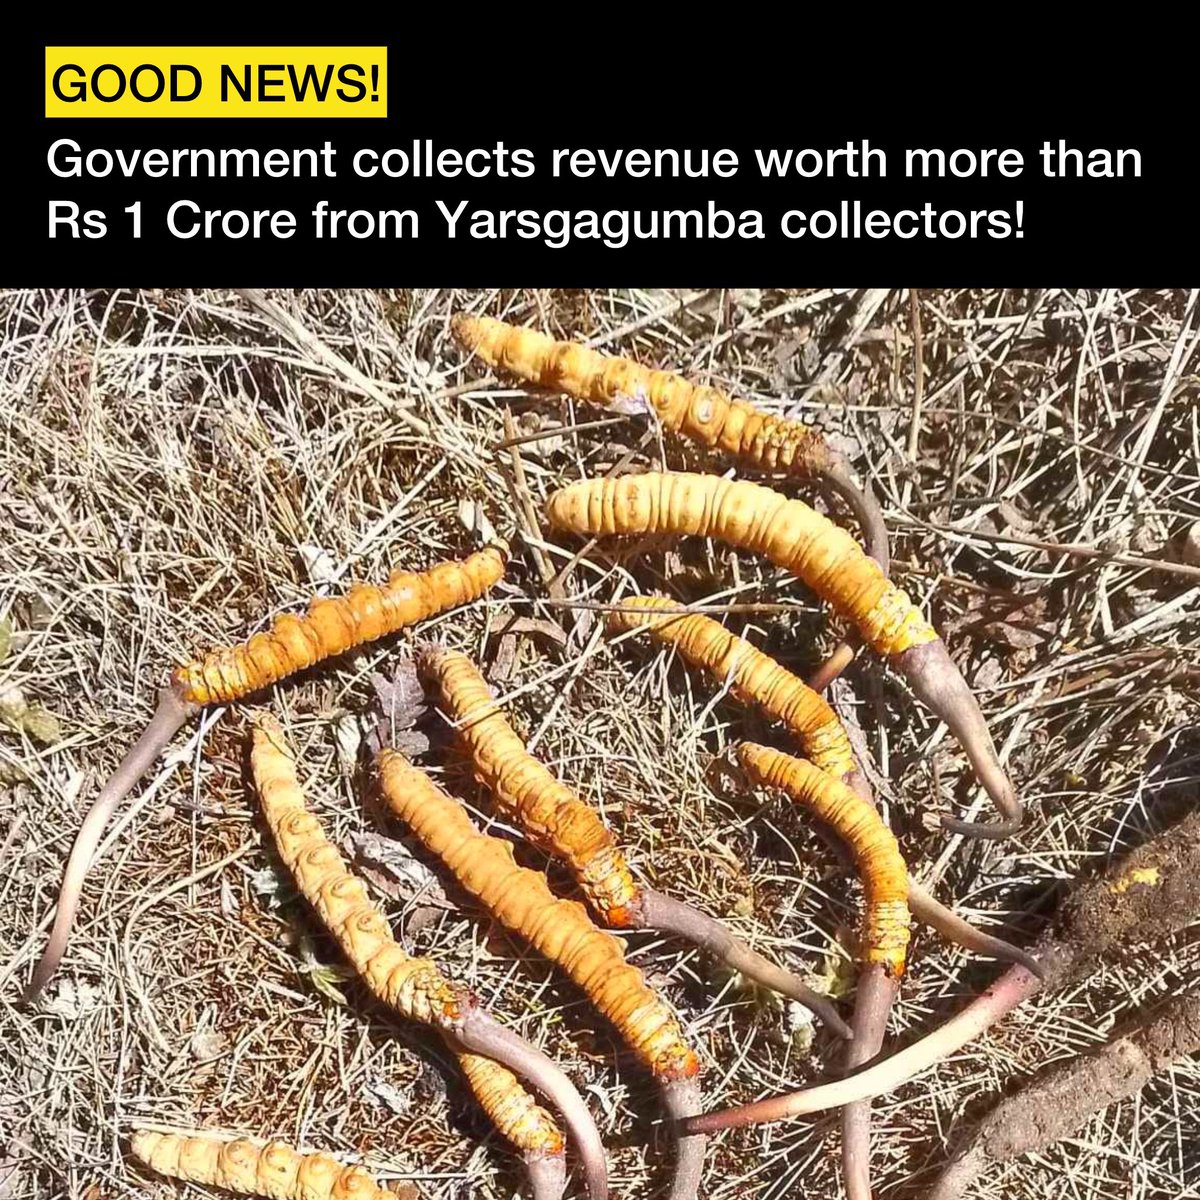 GOOD NEWS: The government has collected about Rs 1.25 crore from those who go to pick the precious herb Yarsagumba. According to the Shey-Phoksundo National Park office, 7,400 people have come to collect Yarsagumba in Dolpa. This revenue is only from the Dolpa district.